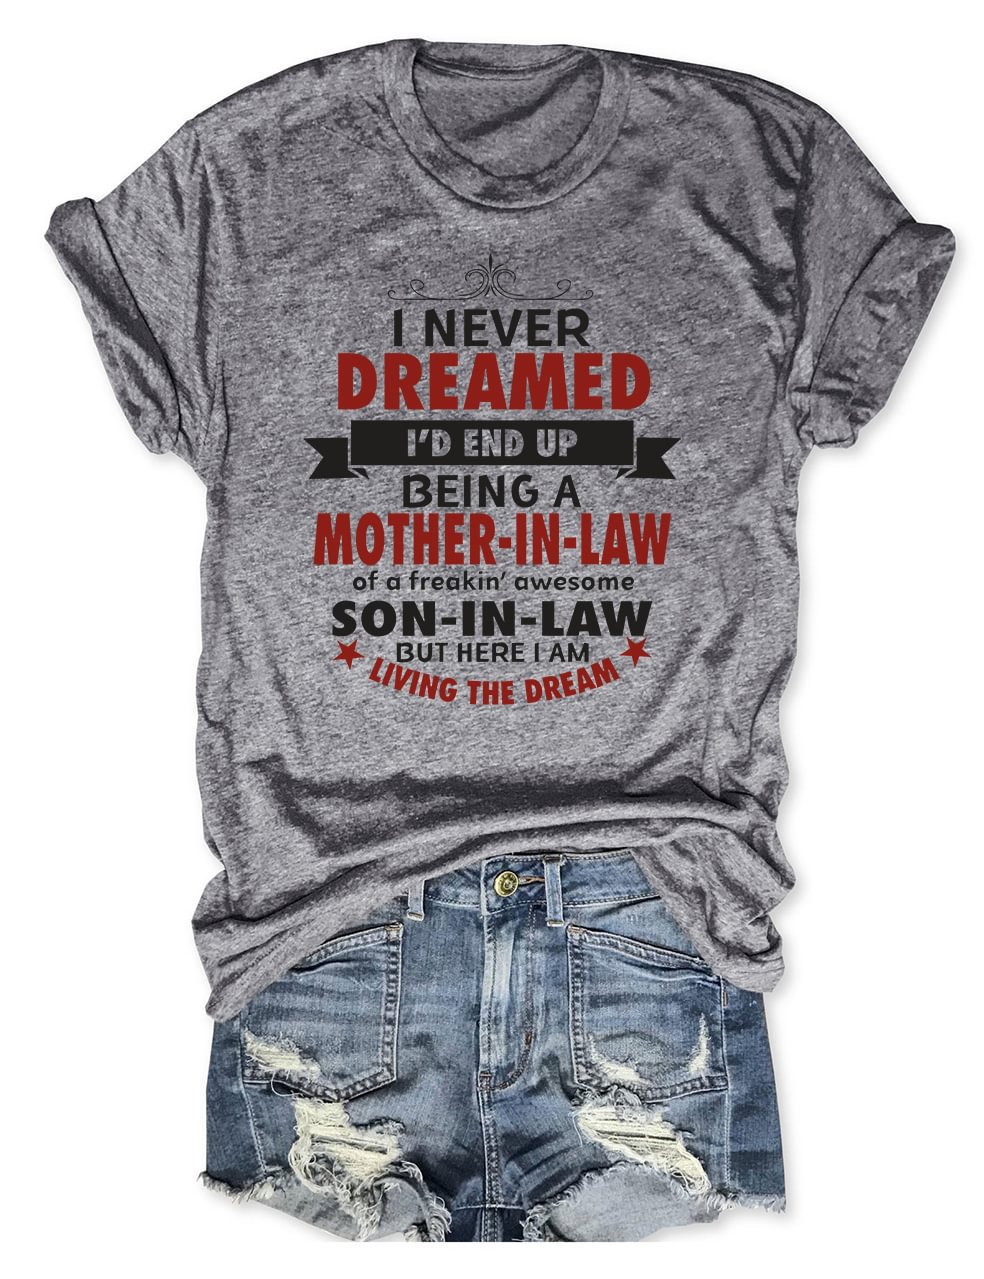 I'd End Up Being A Mother In Law T-Shirt